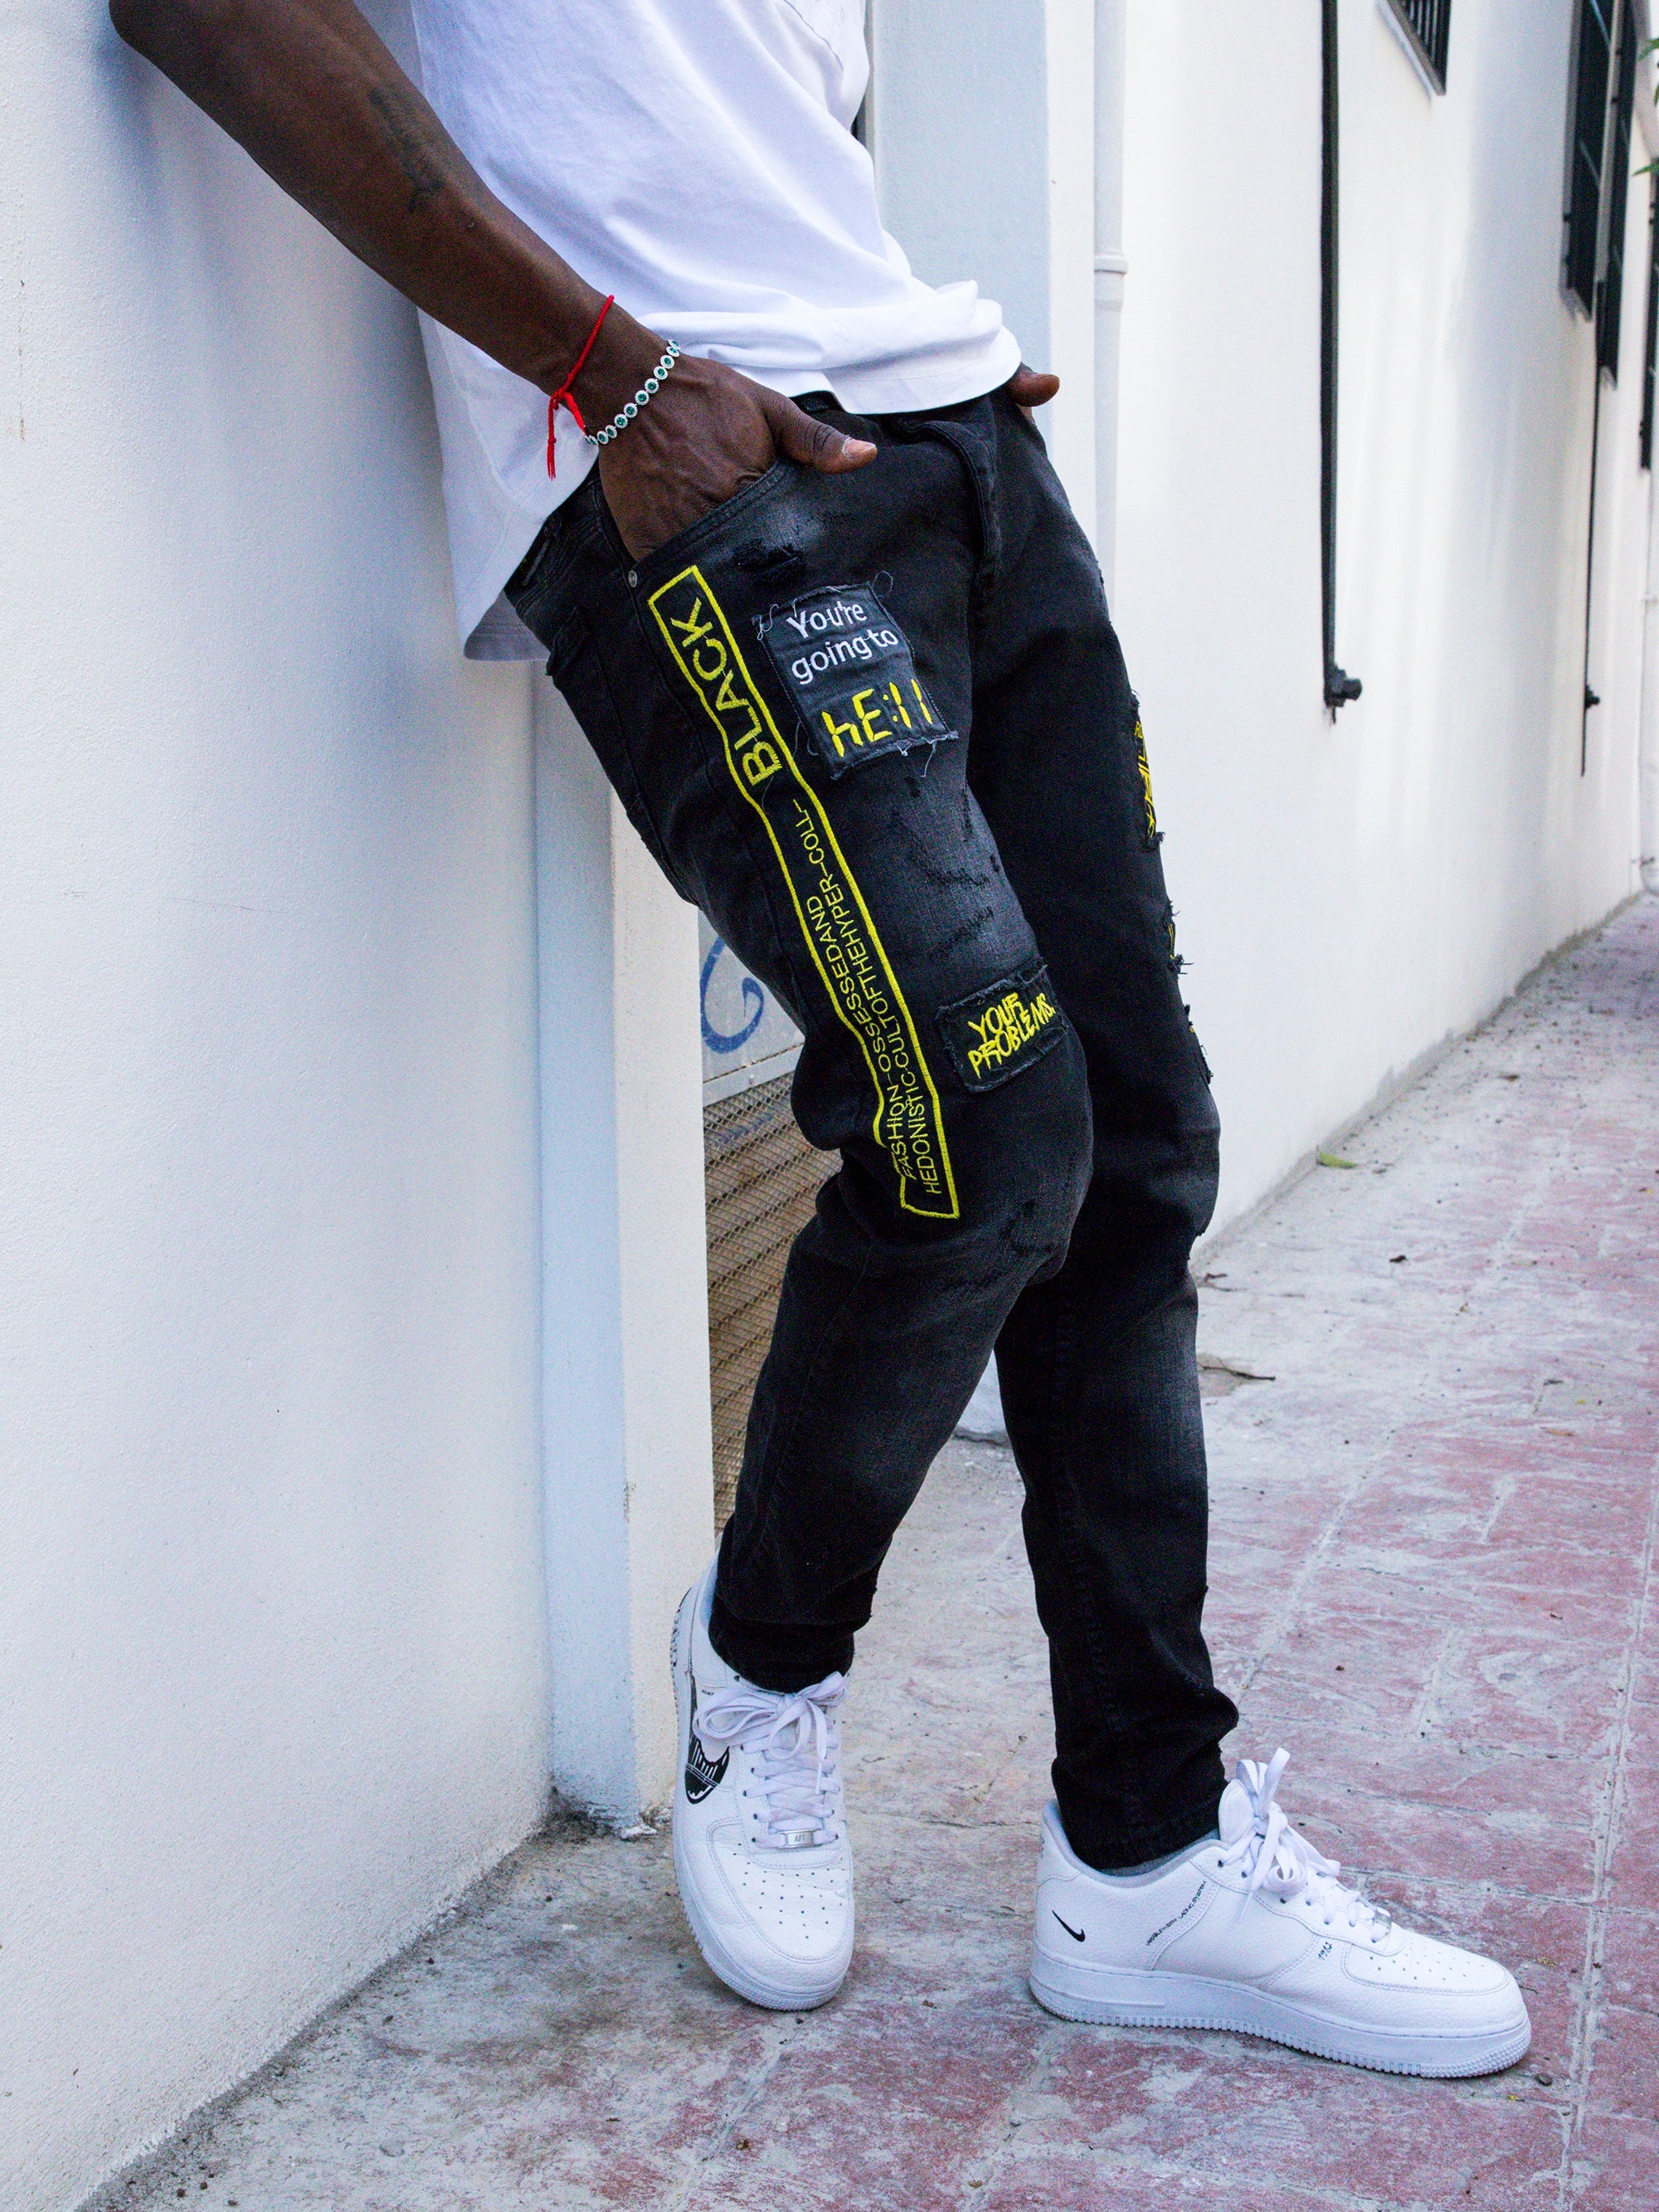 A man leaning against a wall wearing BLACK FALCON jeans and a white t-shirt.